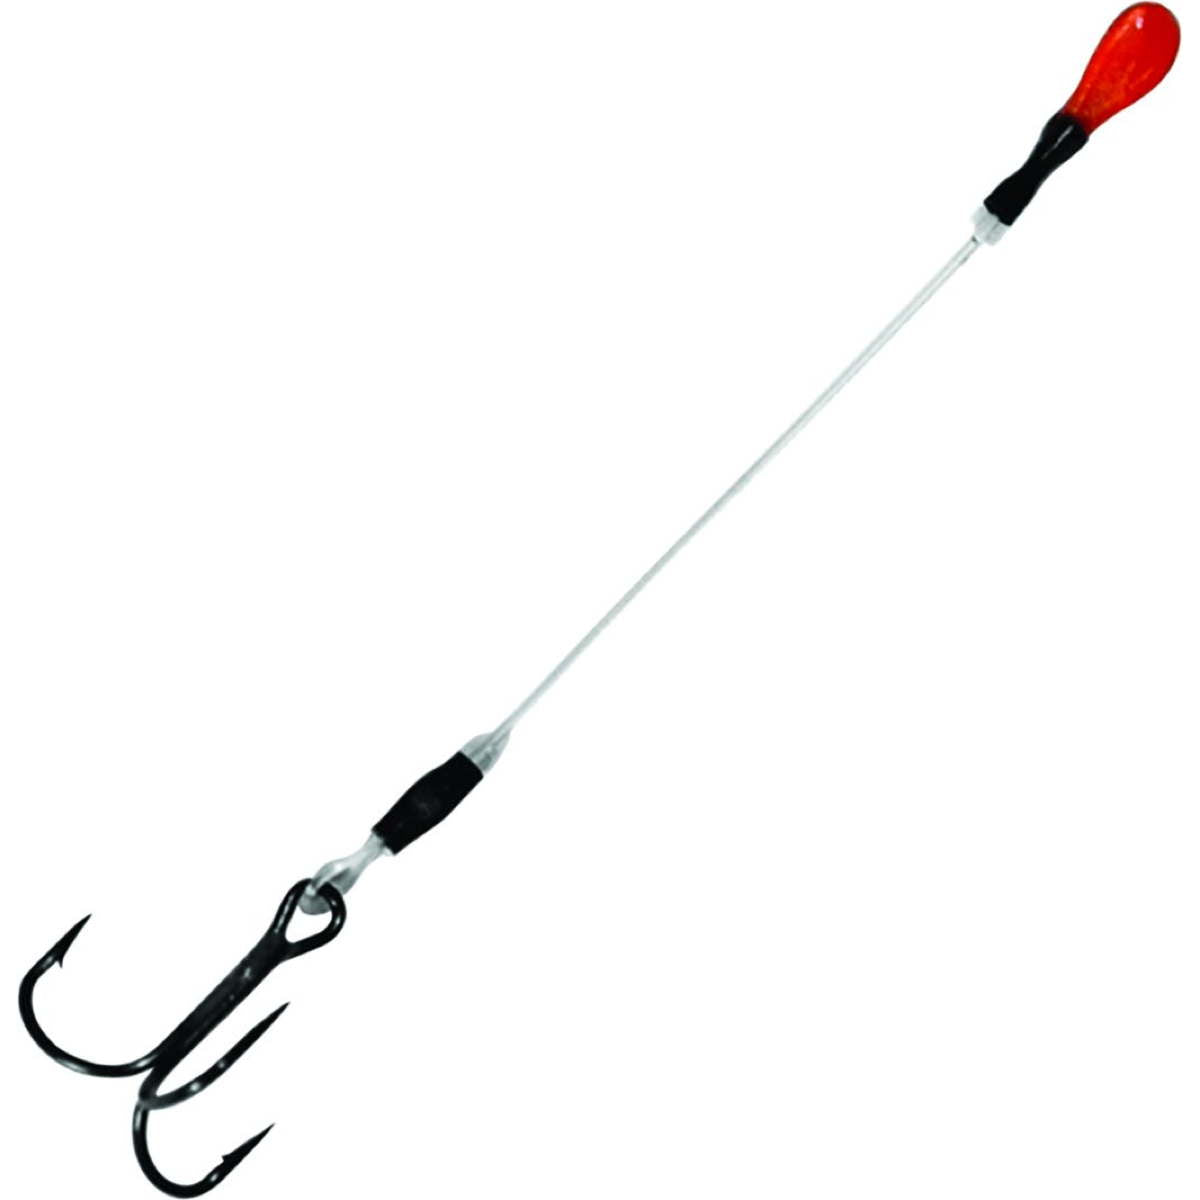 Photo of Eagle Claw Lazer Sharp Stinger Snell Treble Hook for sale at United Tackle Shops.